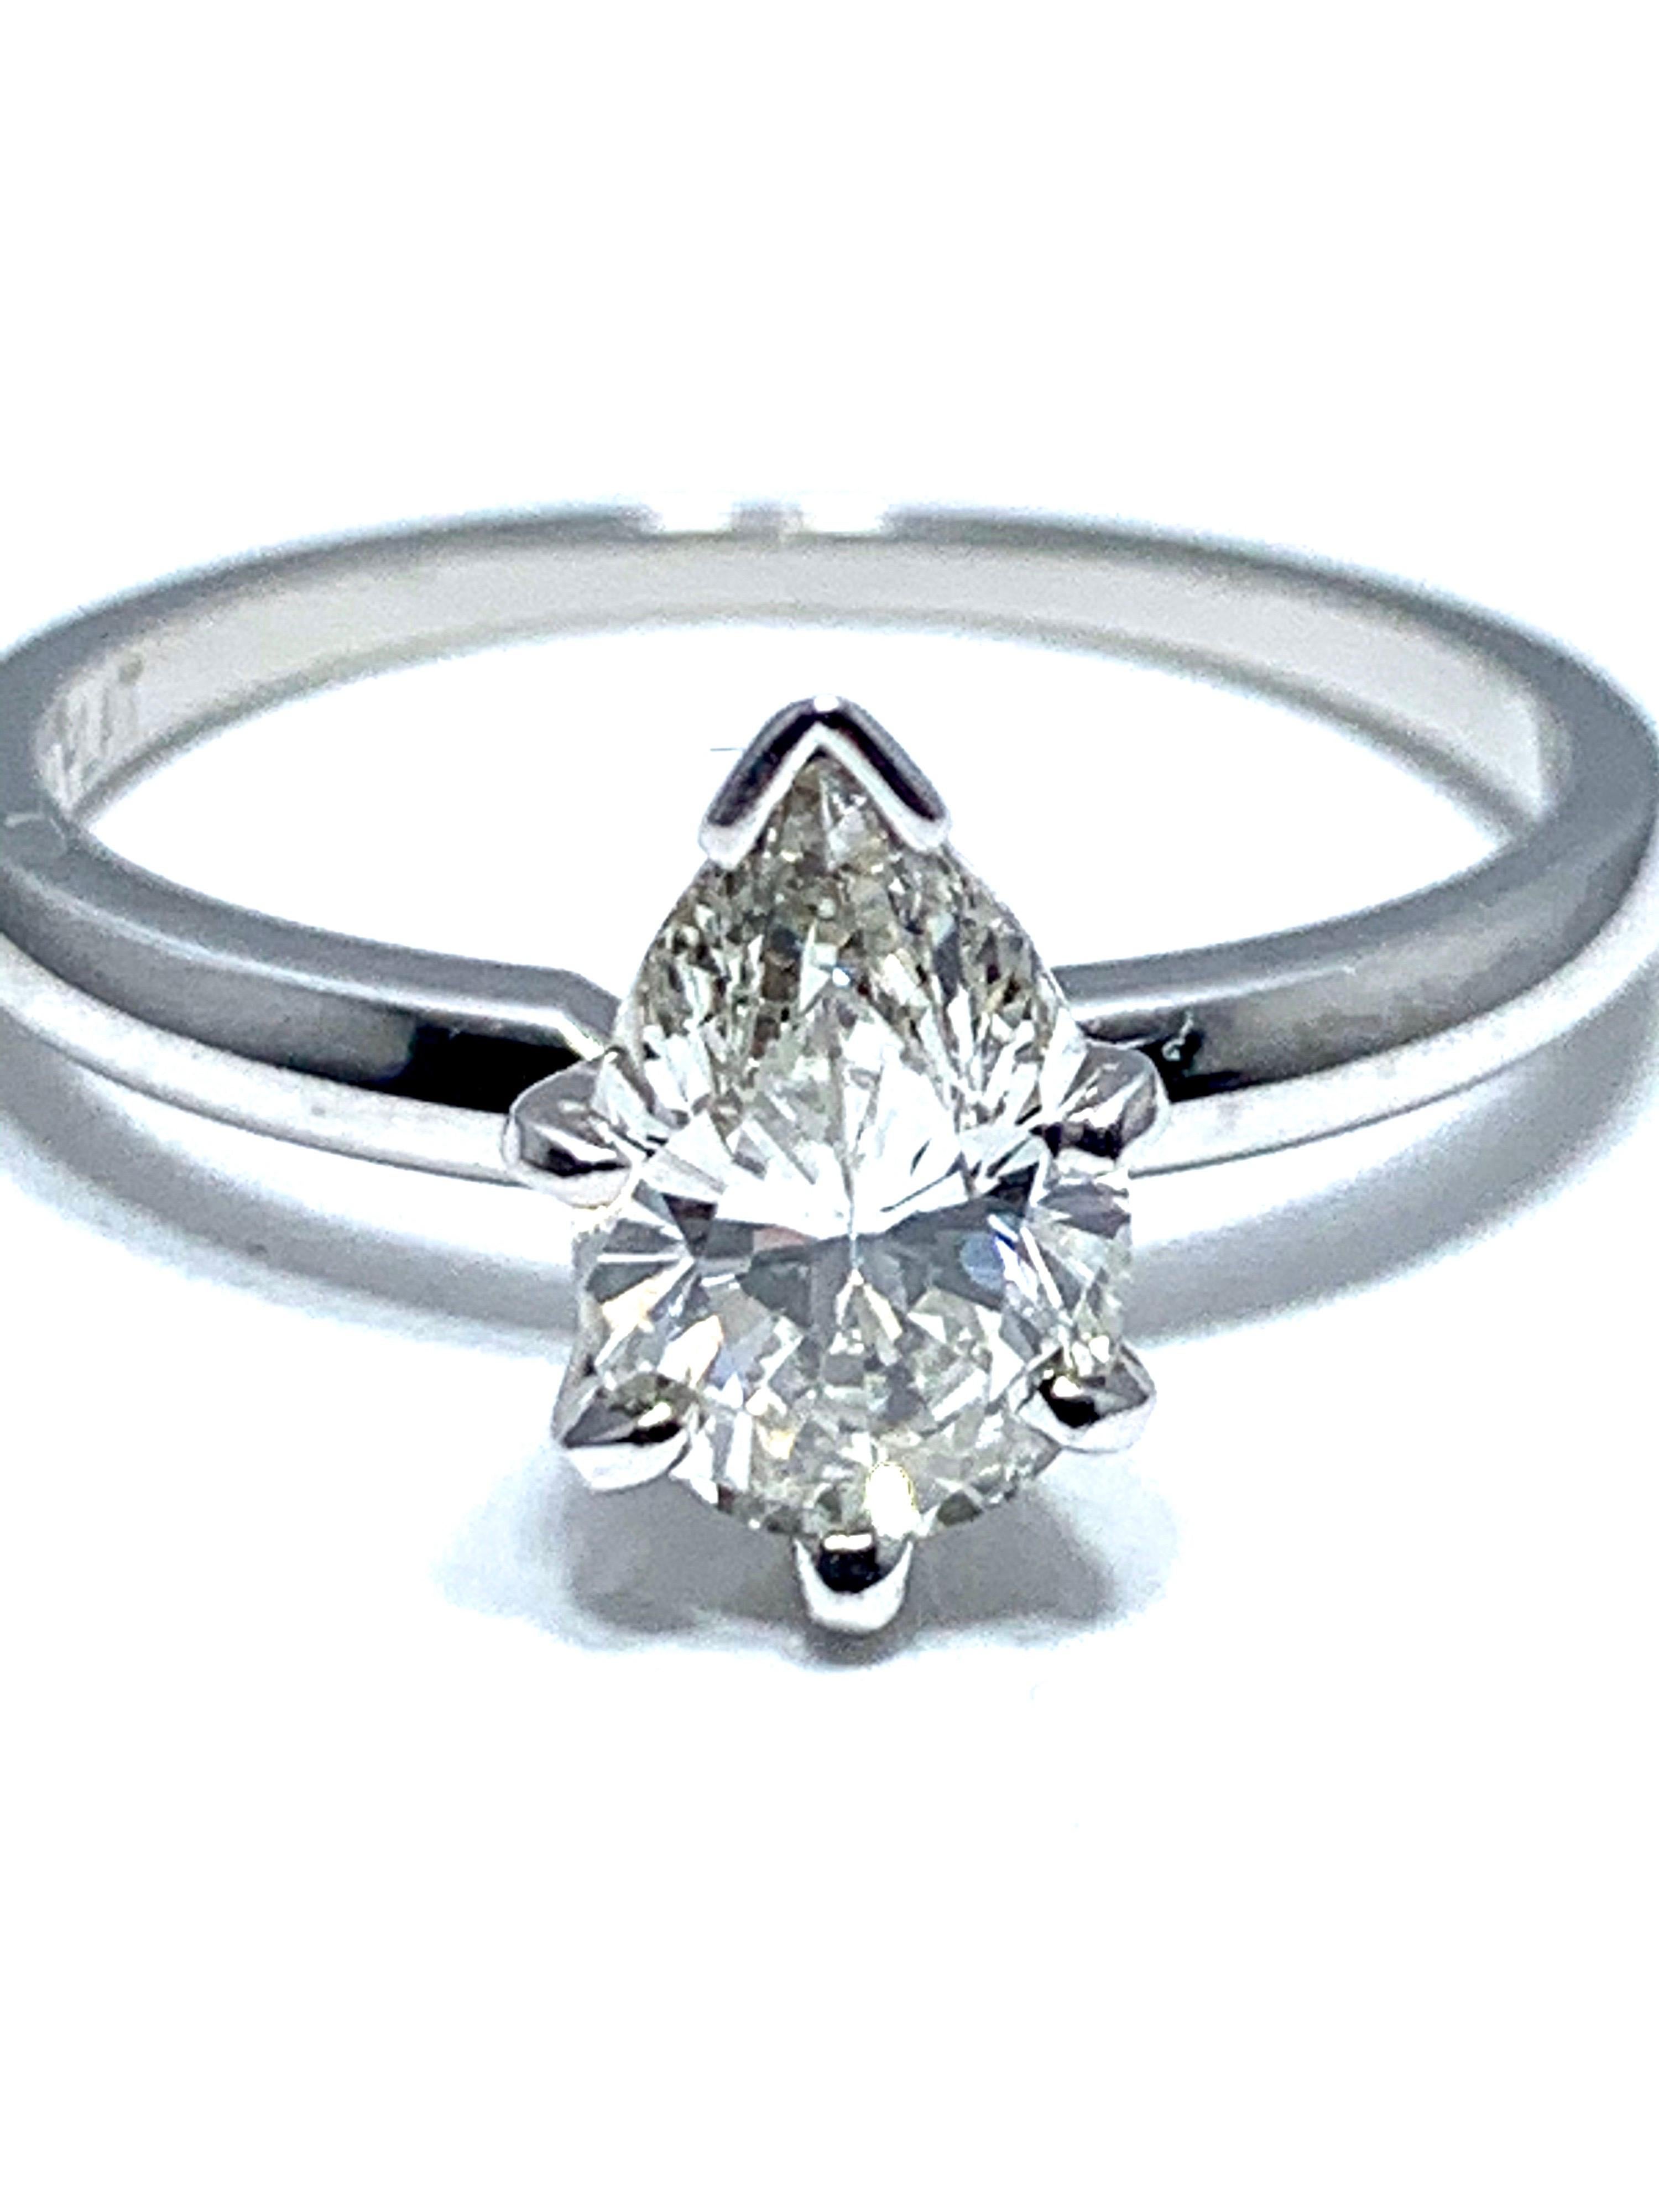 An eye catching 1.02 carat pear shape brilliant cut diamond engagement ring.  The center diamond is set in a six prong platinum head on a polished platinum shank.    The center diamond is graded by GIA as J color, VVS2 clarity, and displays a fury